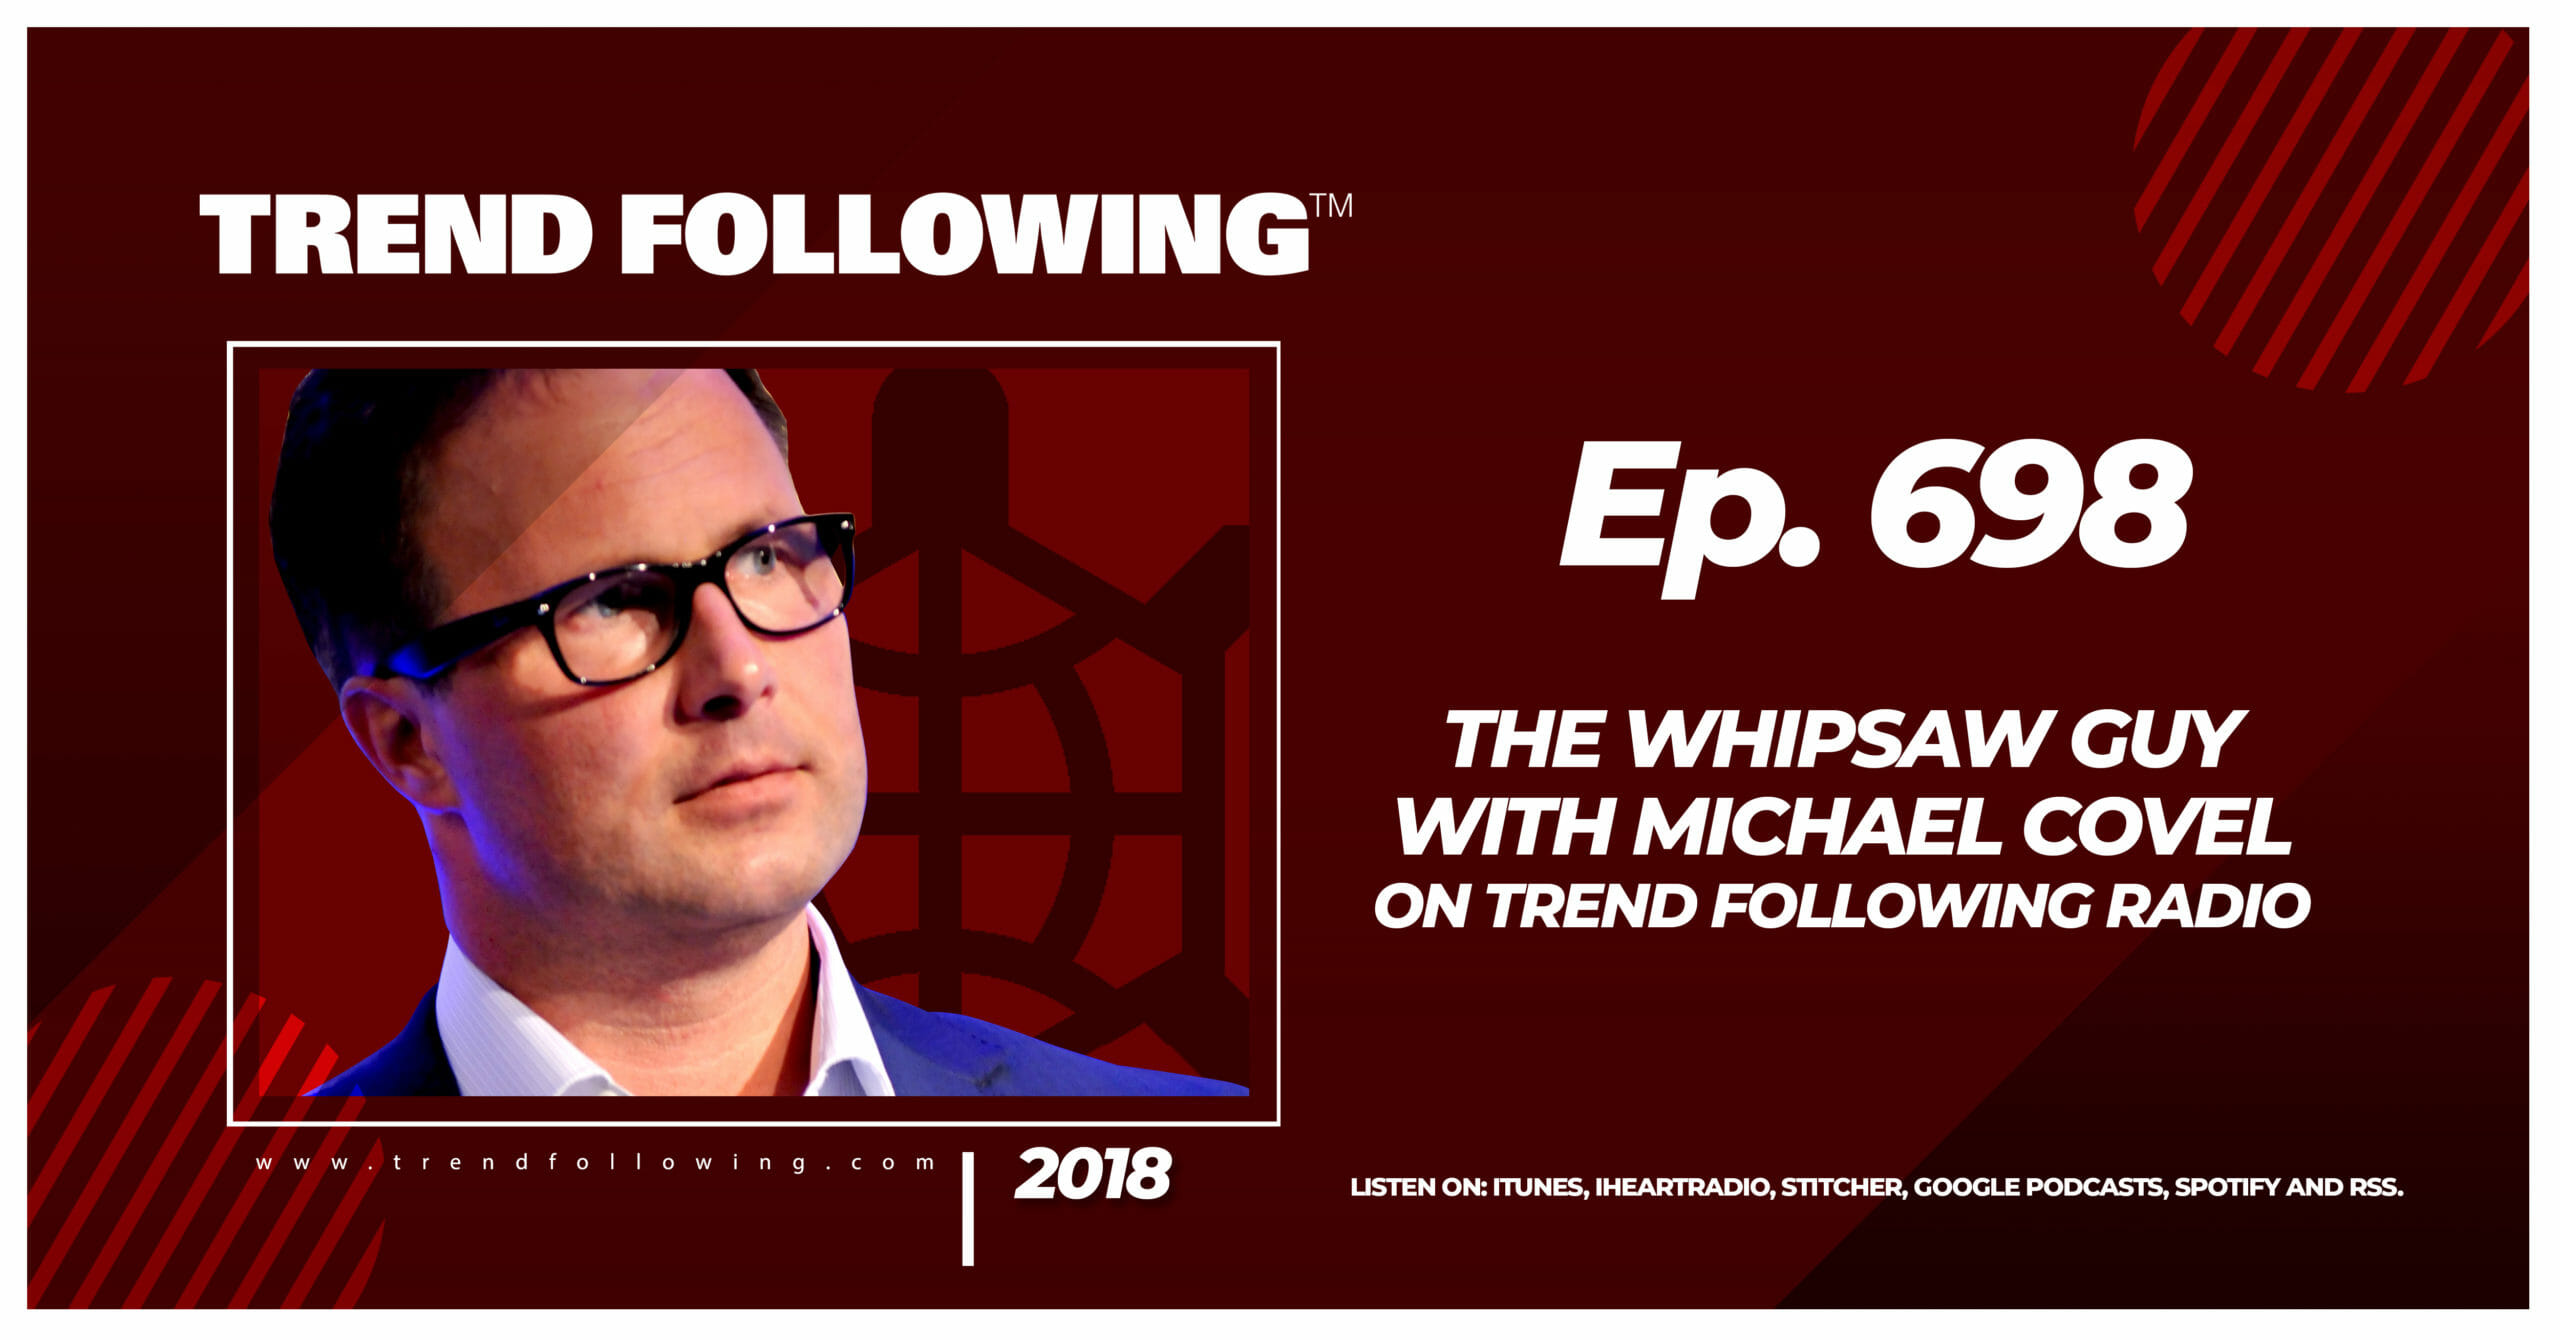 The Whipsaw Guy with Michael Covel on Trend Following Radio